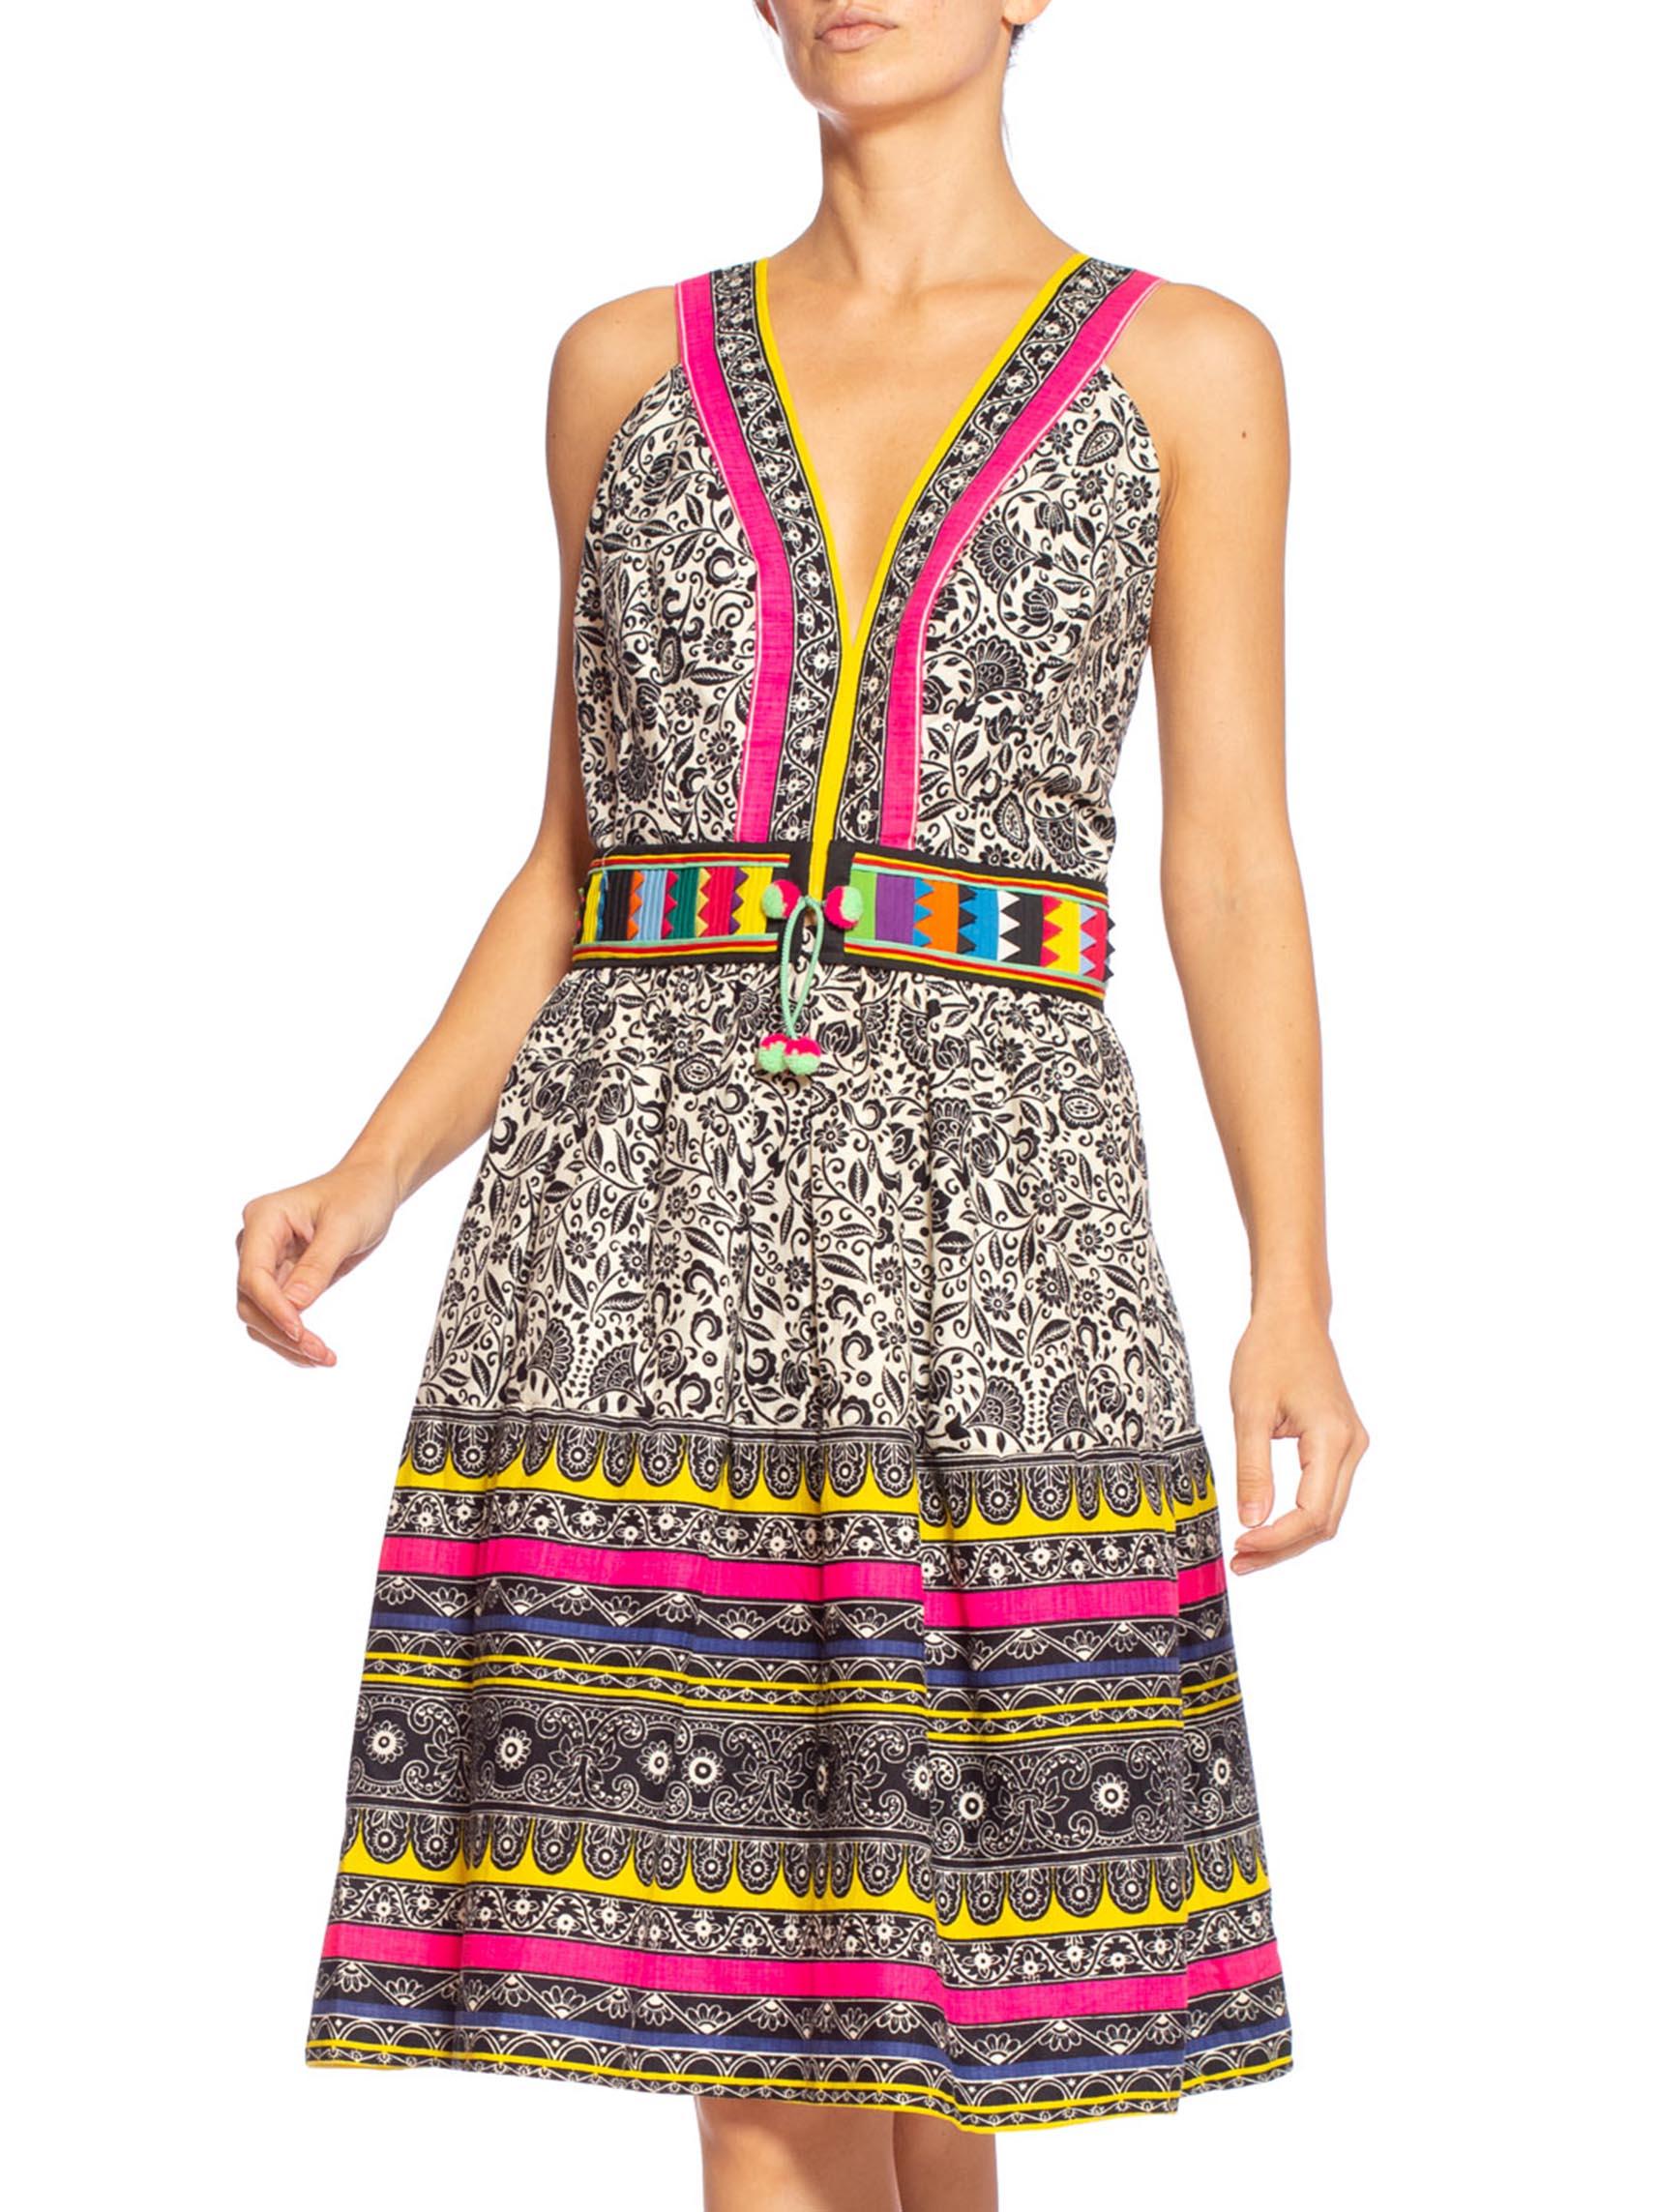 Women's MORPHEW COLLECTION Black & White 1960S Printed Cotton Dress With Colorful Handm